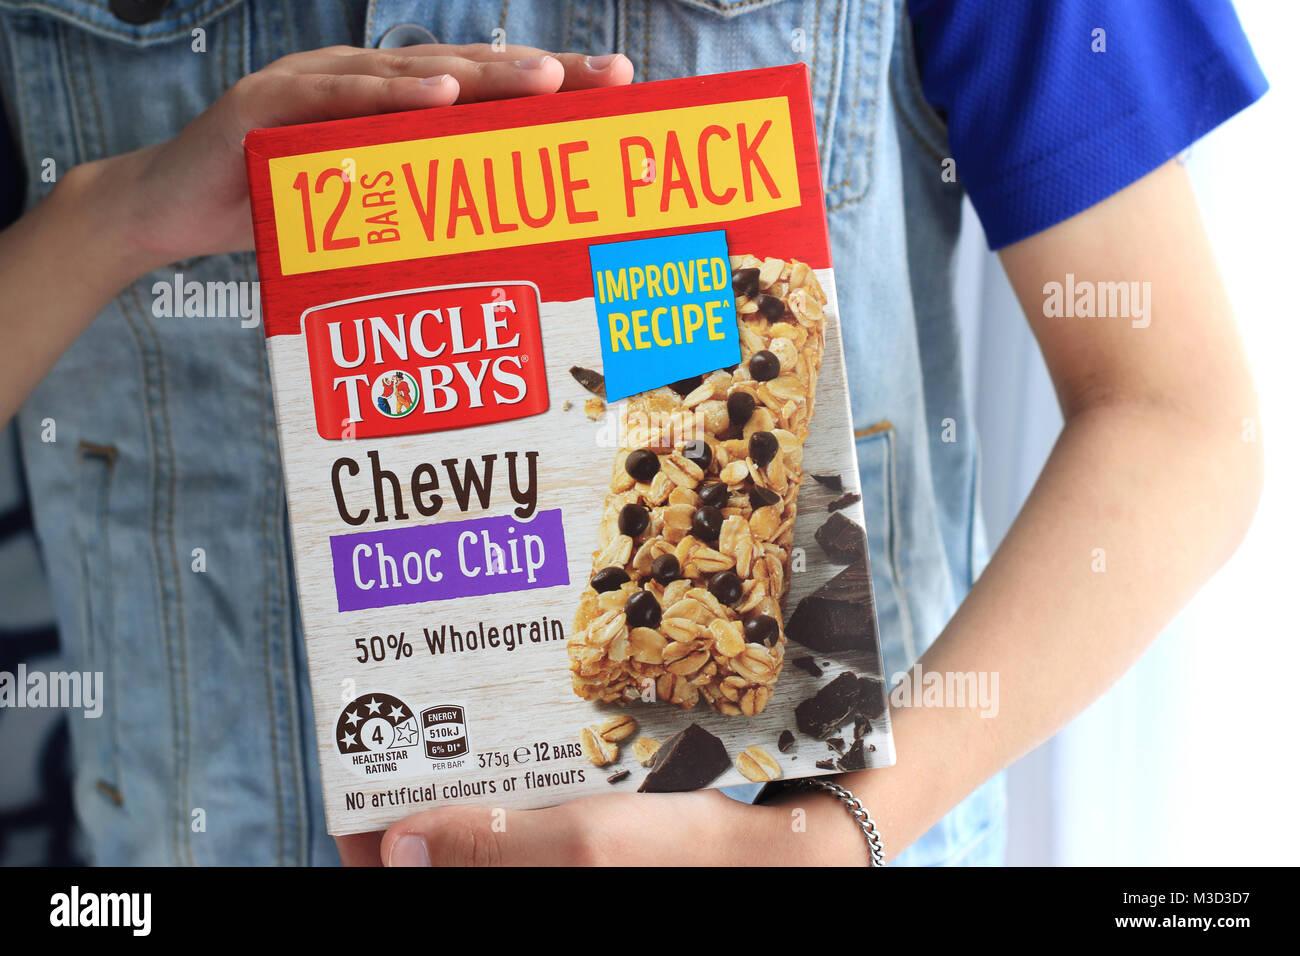 Uncle Toby's Chewy Choc Chip Stock Photo